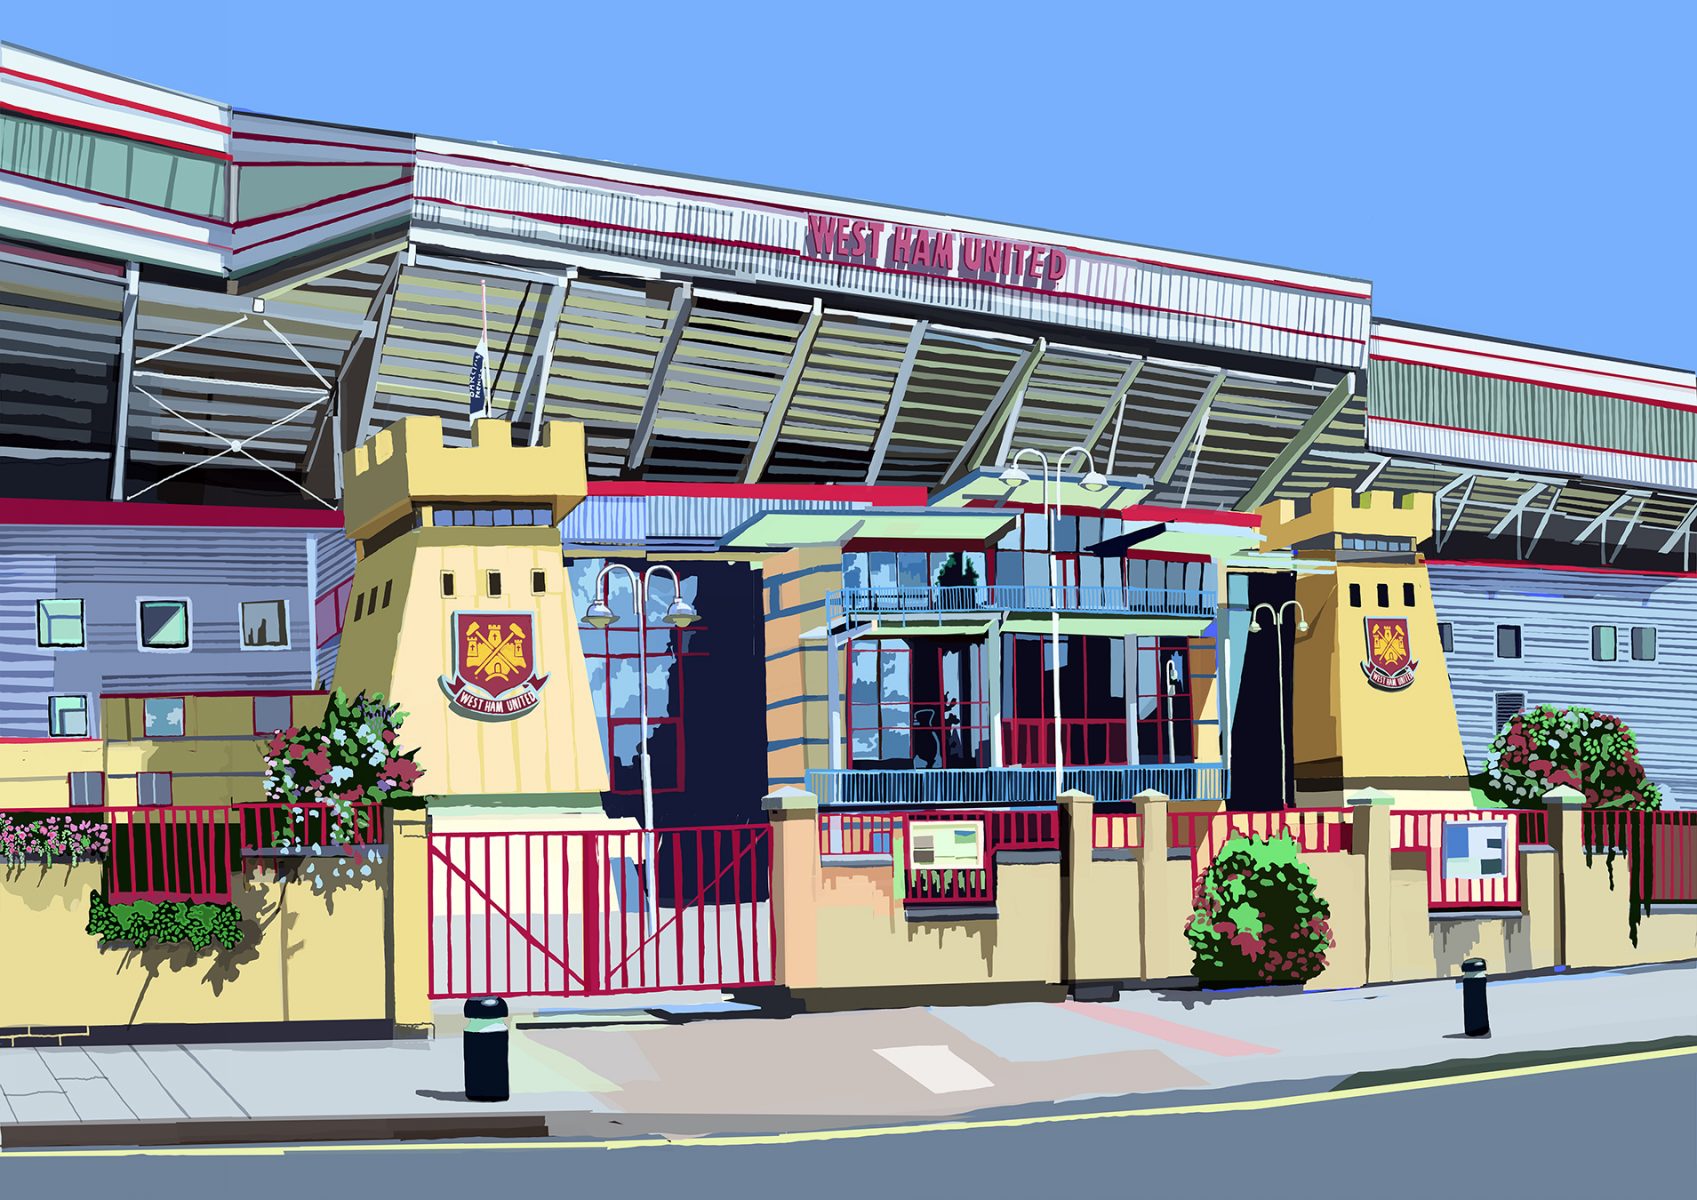 Buy Boleyn Ground West Ham United Stadium Upton Park East London Art Print Urban Makers By Tomartacus Urban Makers Next Day Delivery Available